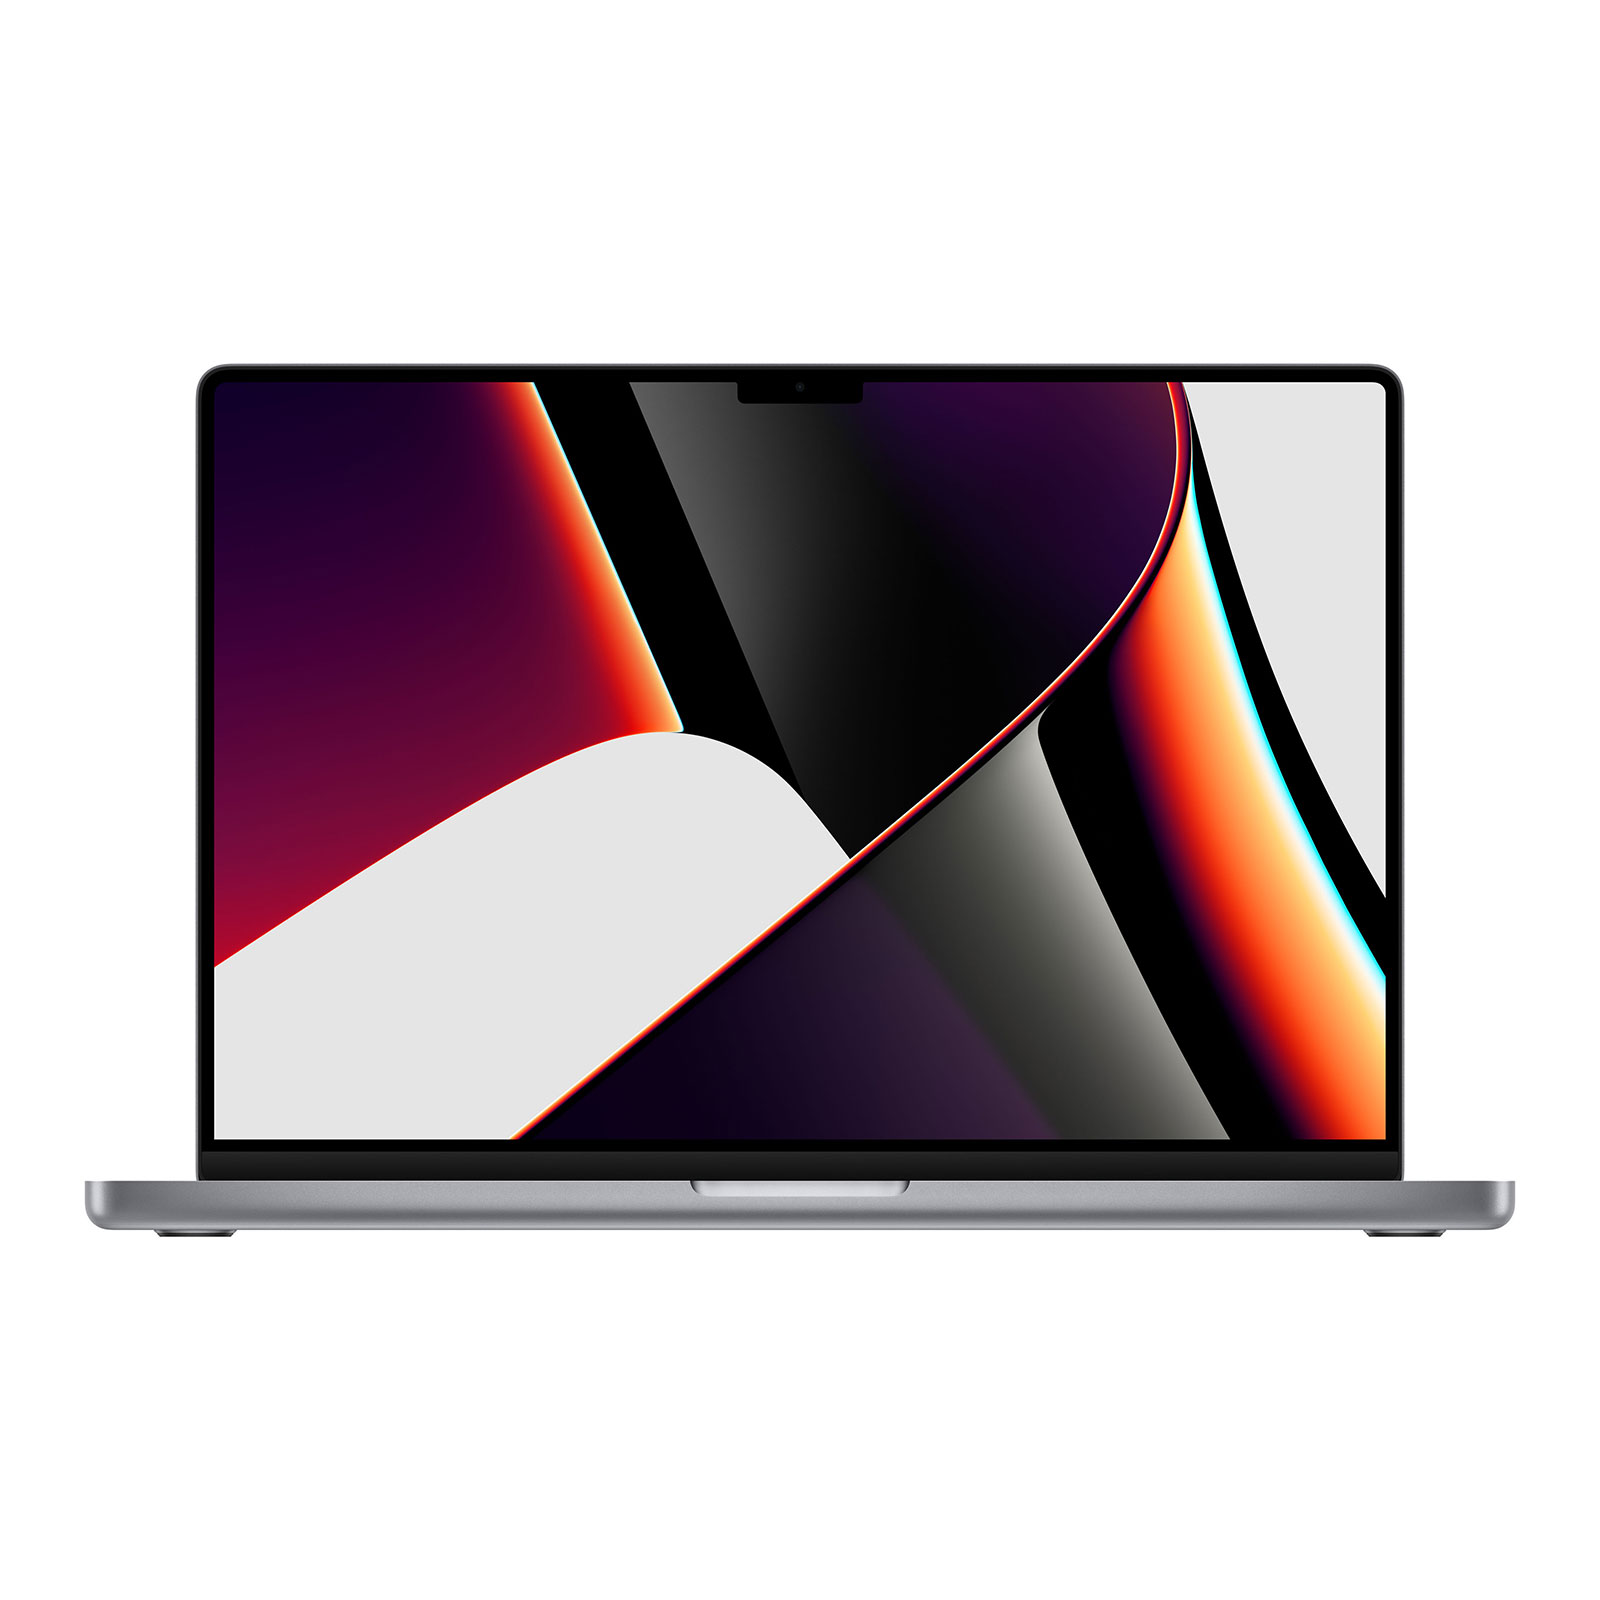 Apple MacBook Pro M1 Max (2021) 16" Gris sideral 32Go/2To (MK1A3FN/A-2TB-QWERTY) - MacBook Apple